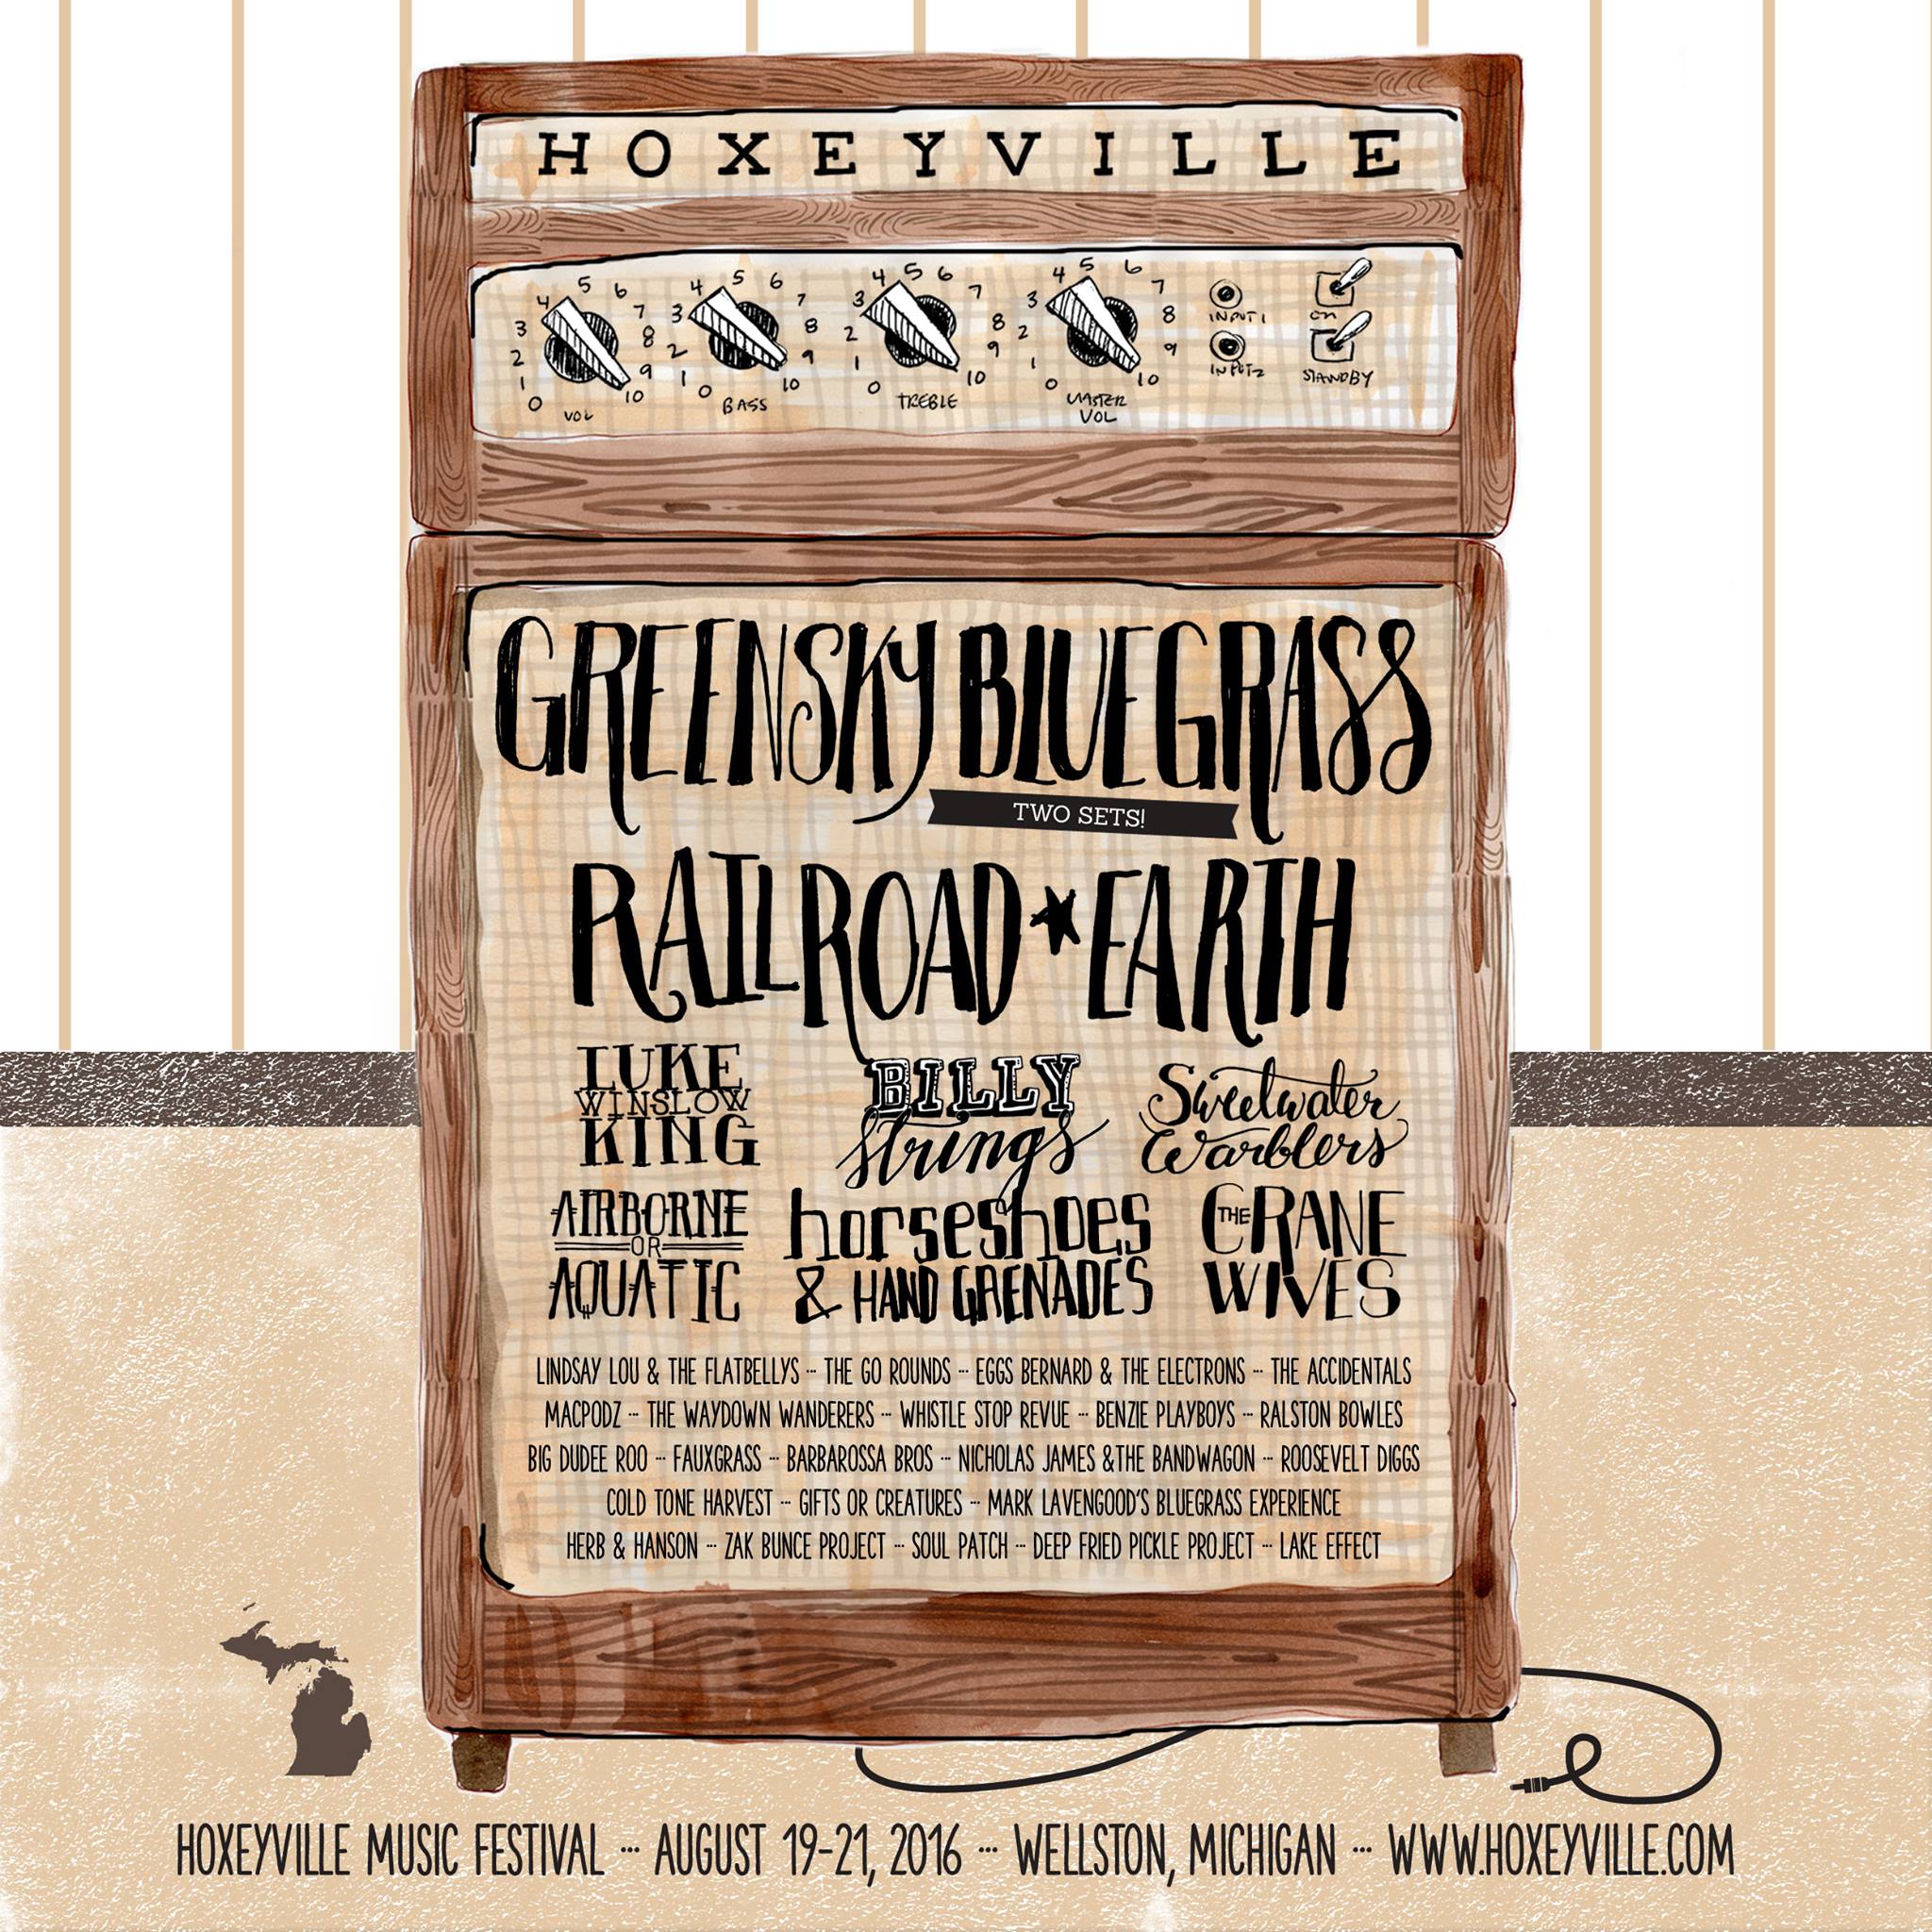 Hoxeyville Music Festival Confirms Lineup